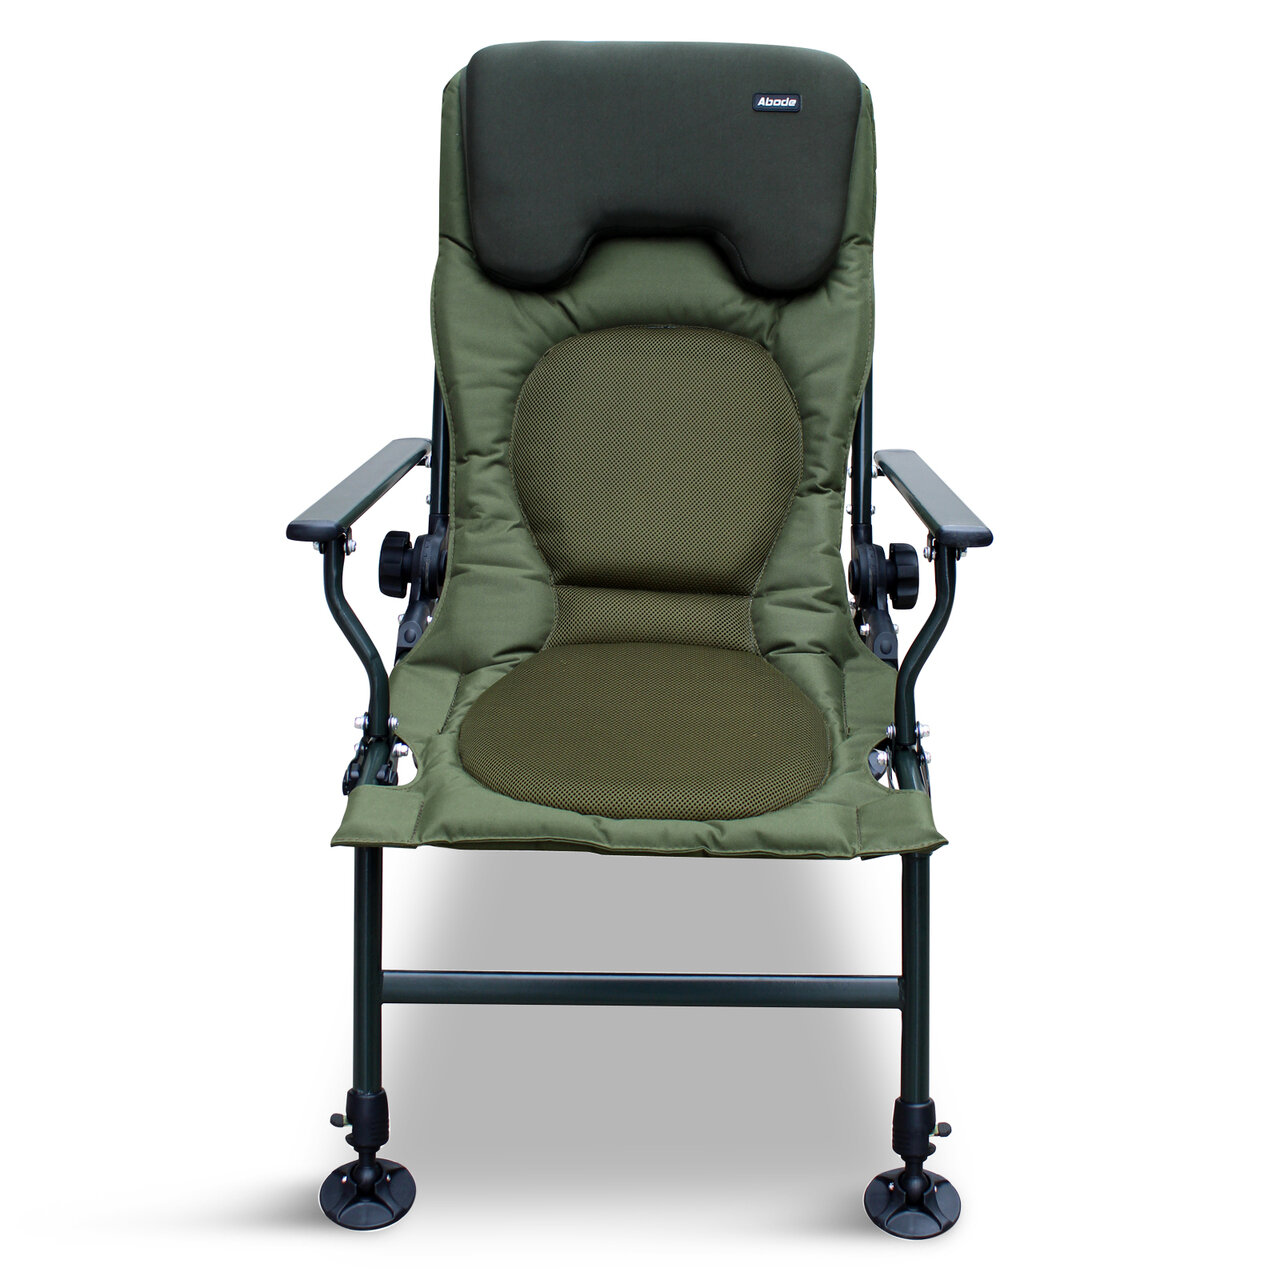 Abode 3D Mesh Padded Carp Fishing Camping Armchair Recliner  Chair